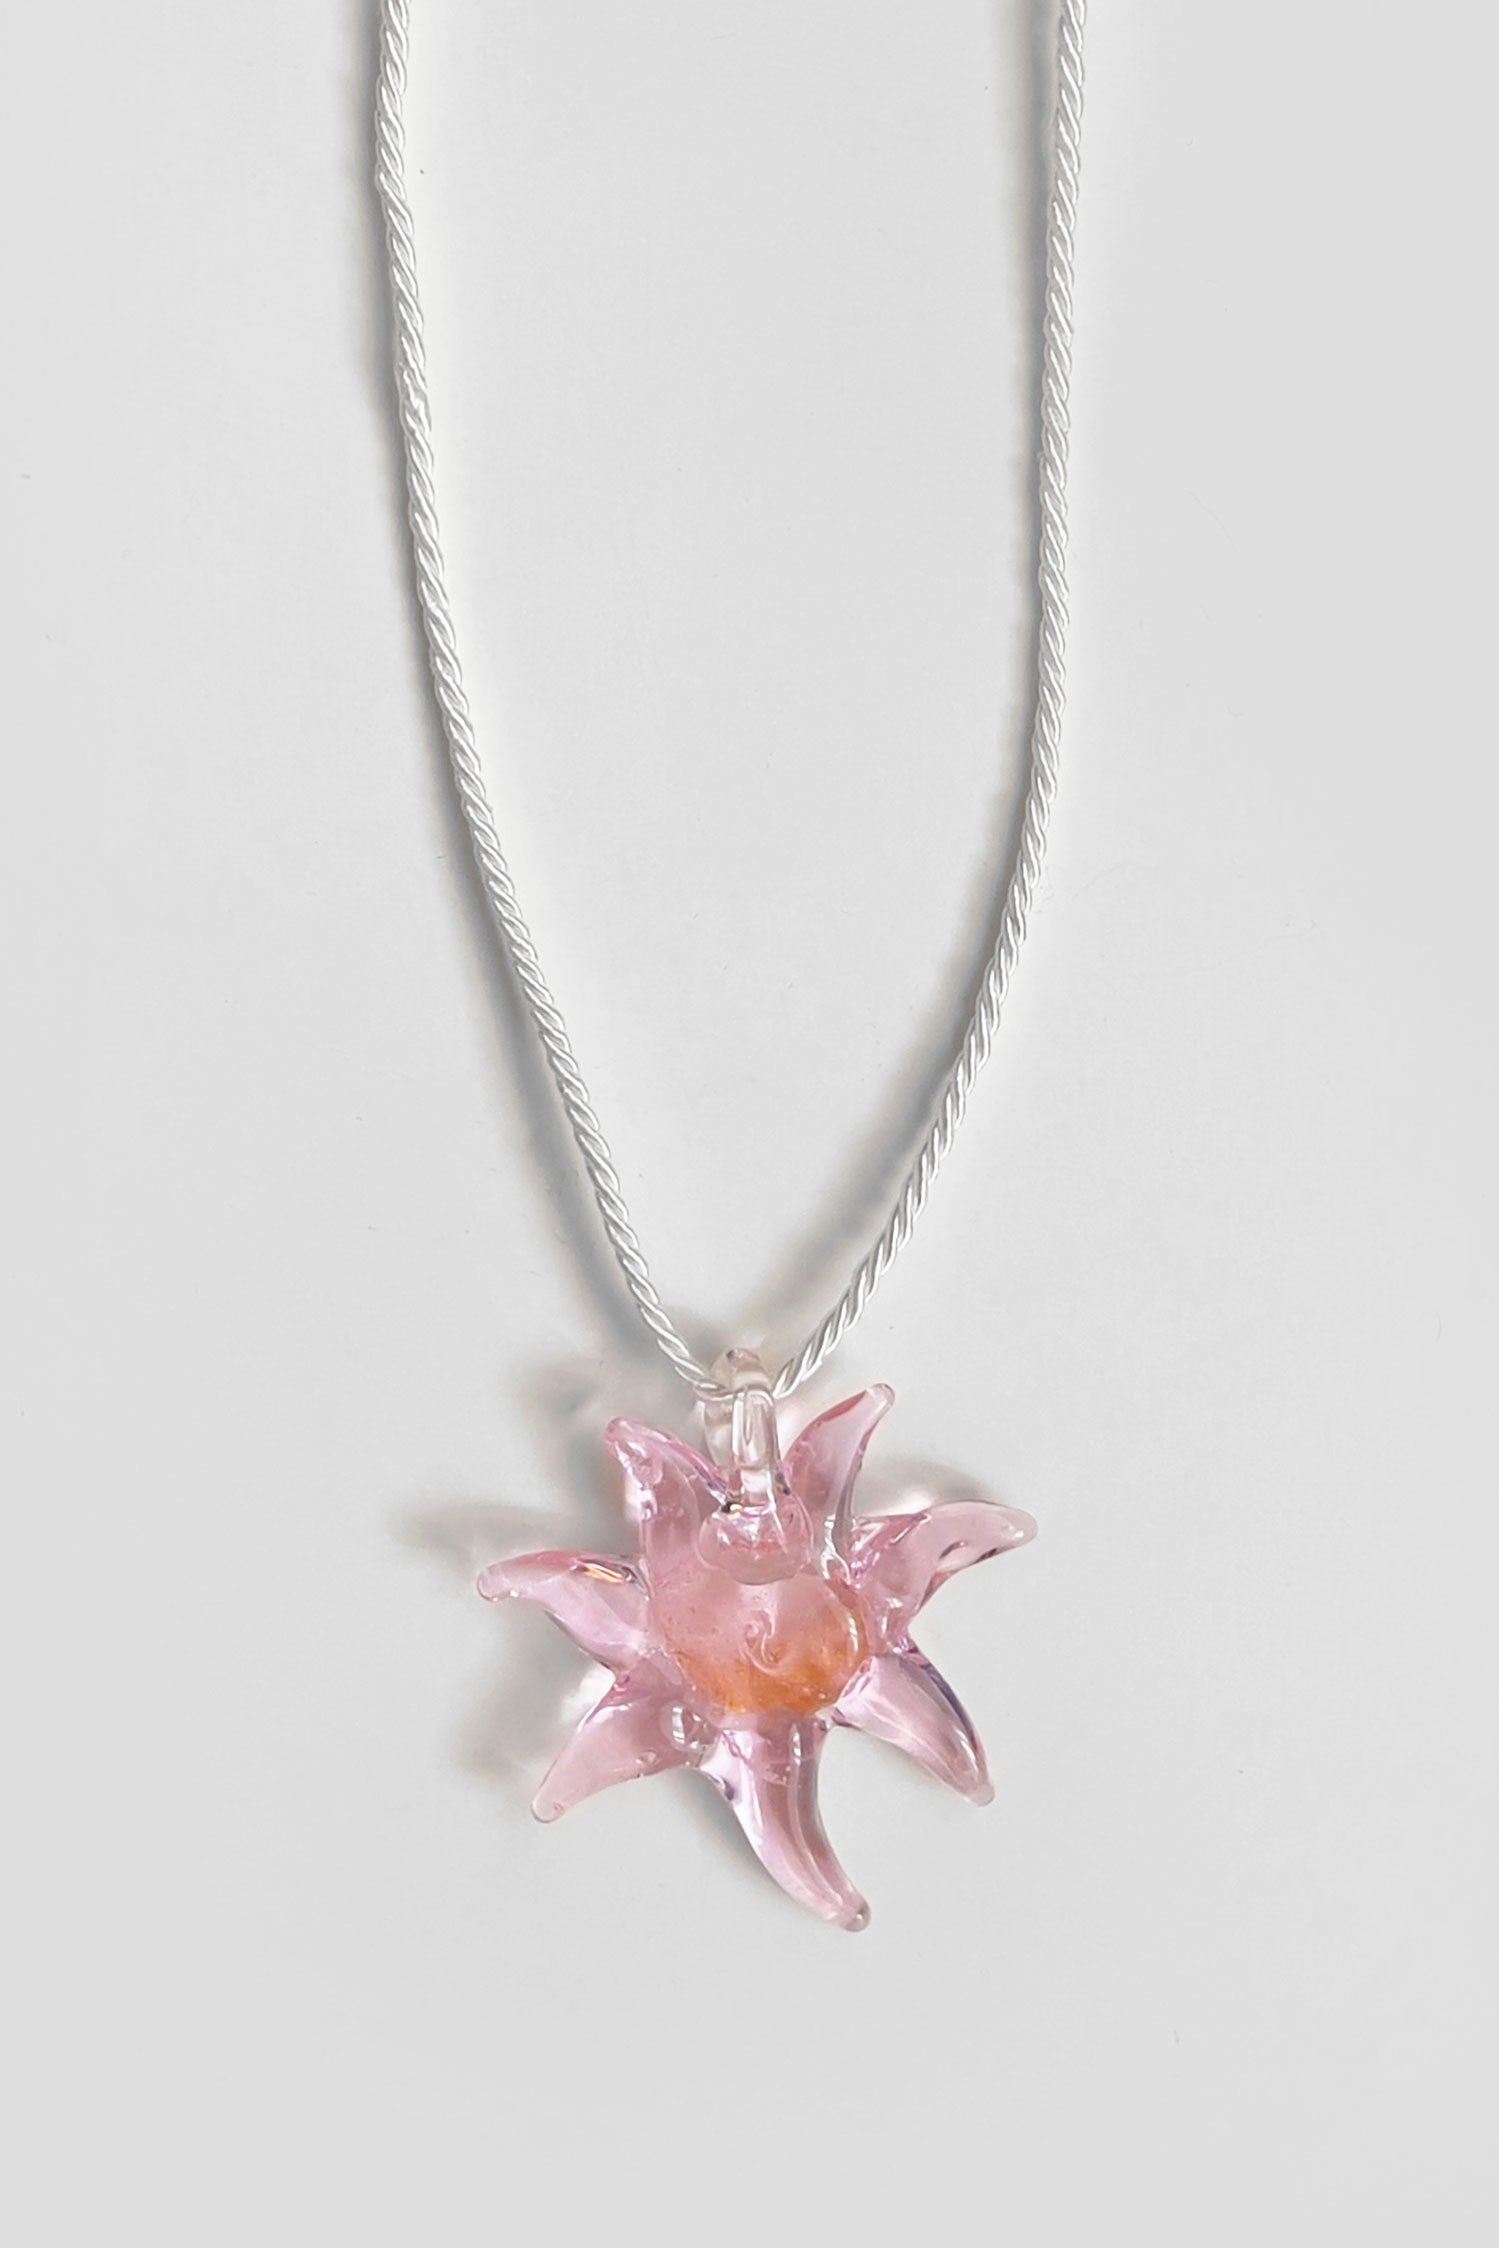 Cord Glass Necklace / Lotus